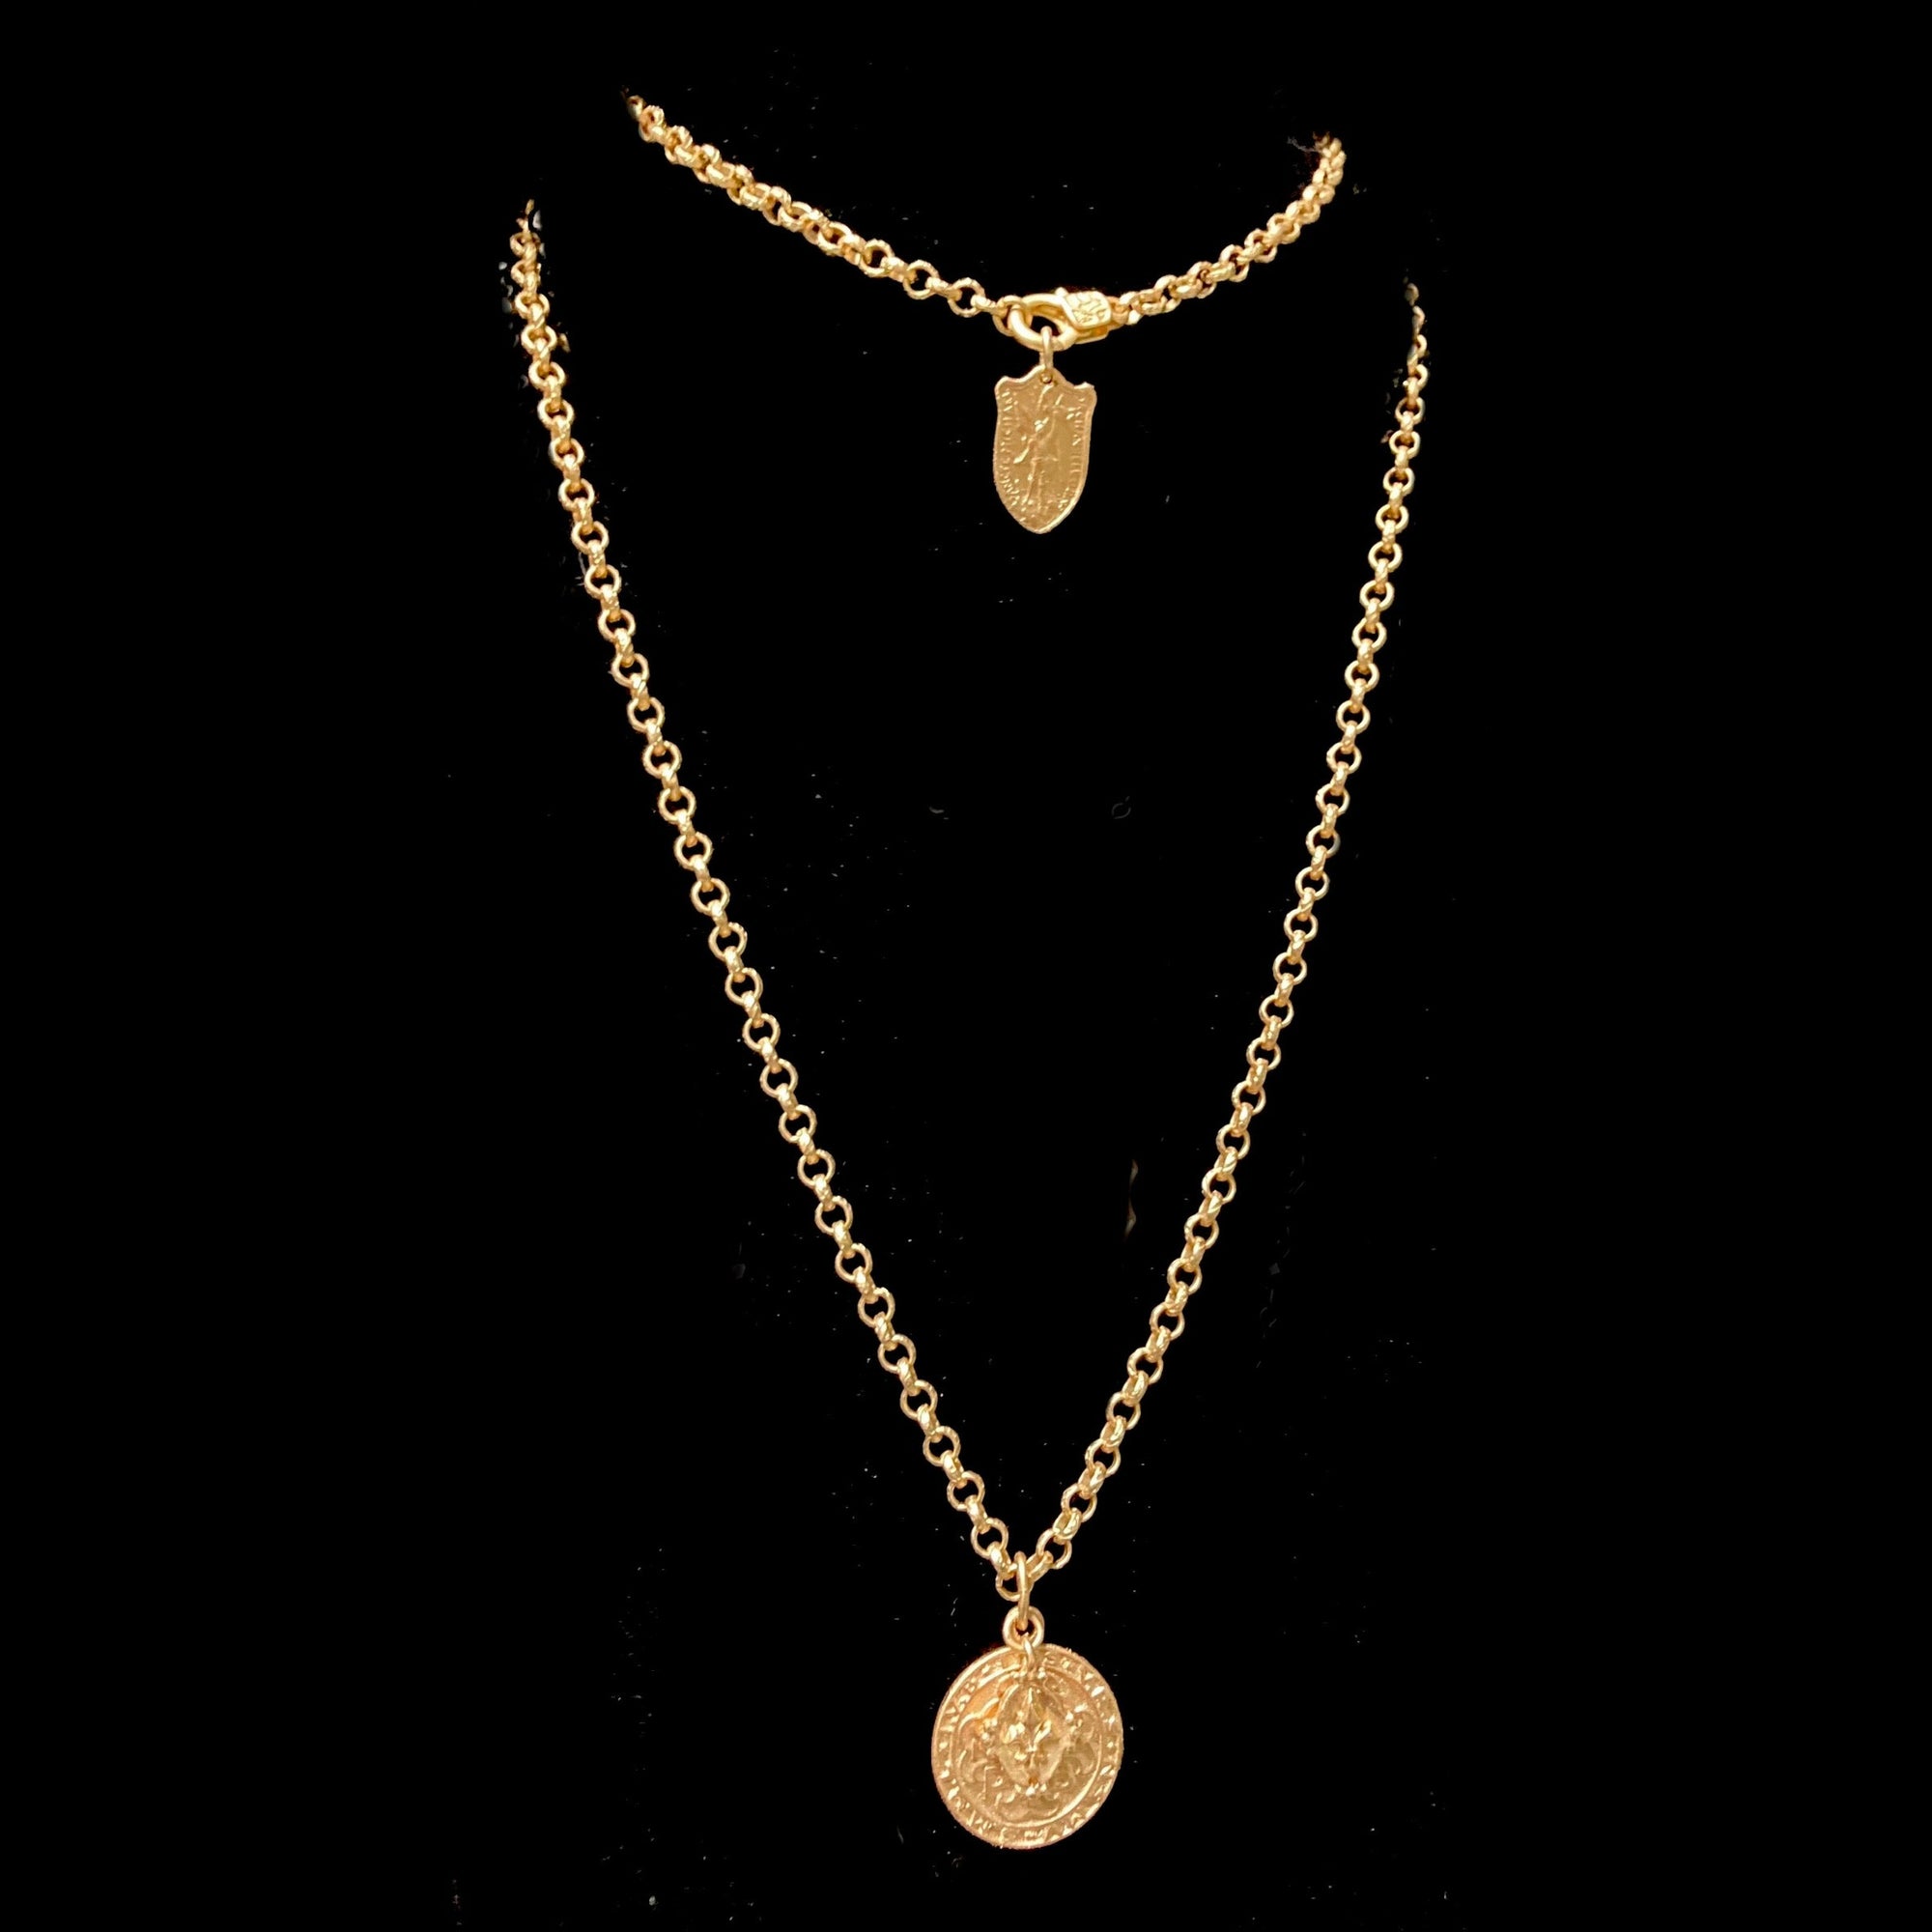 San Benito with Tiny Fleur de Lis on Etched Cable Chain Necklace - Gold